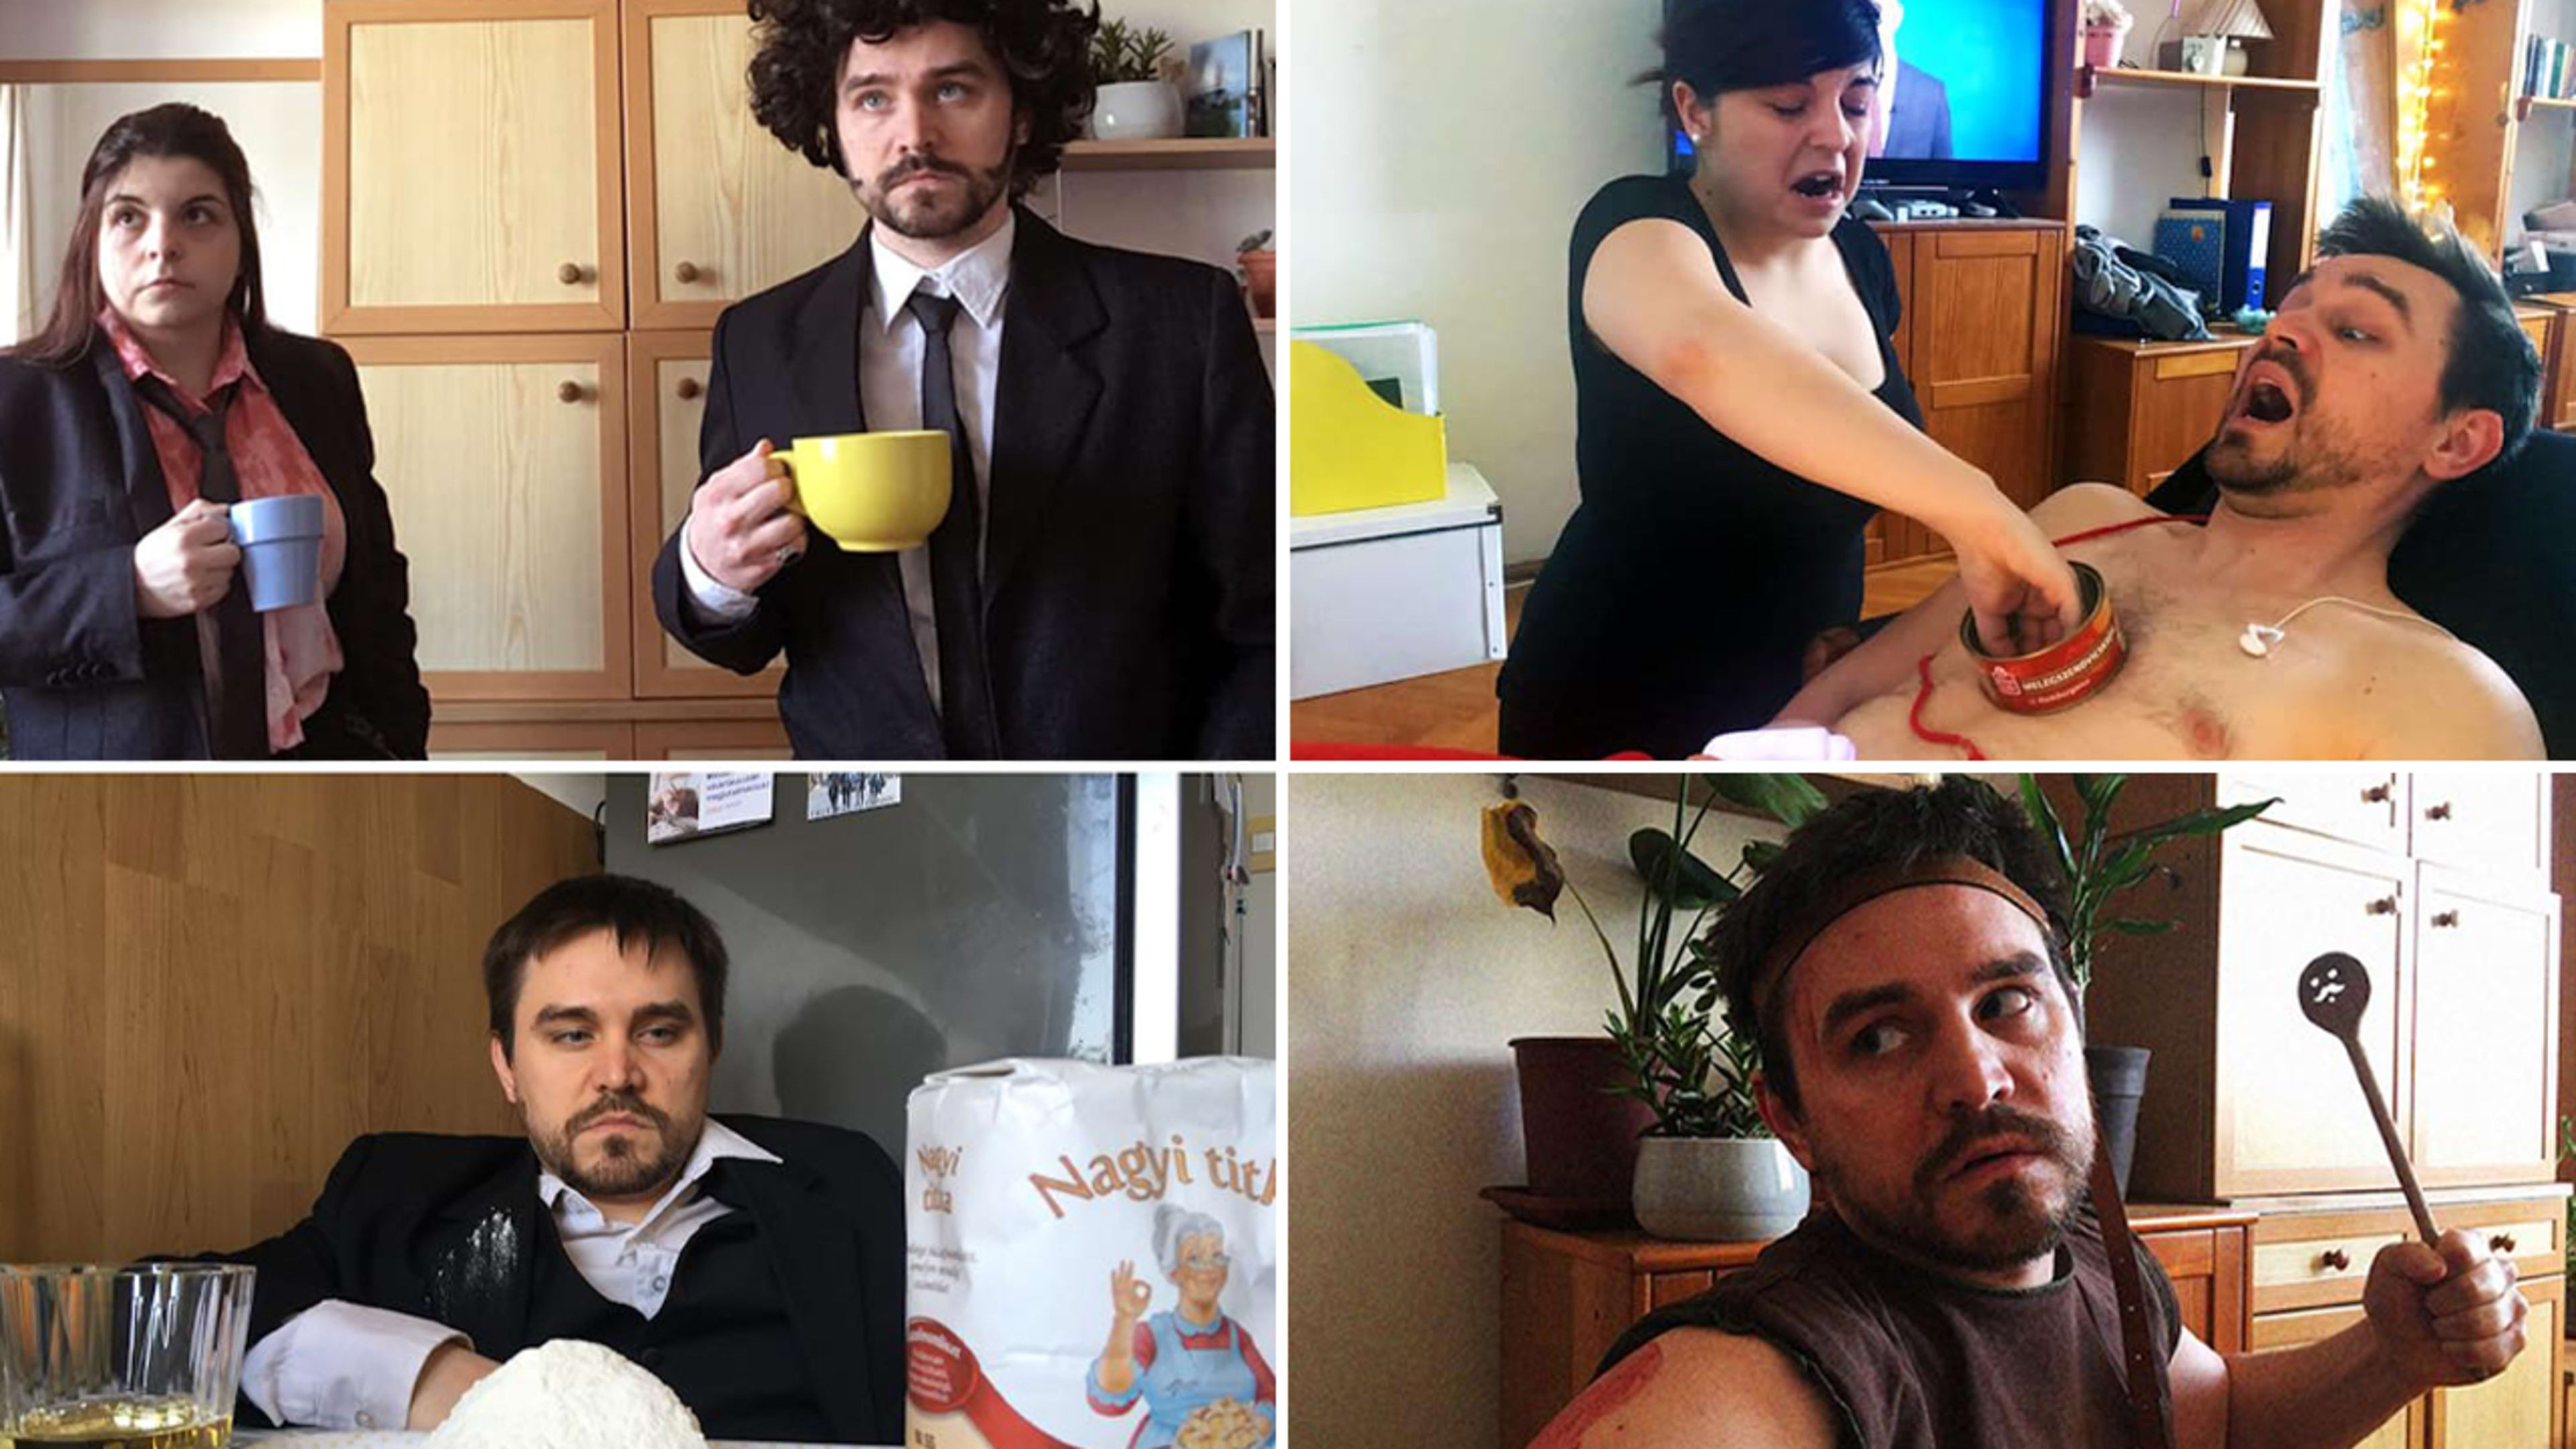 A quarantined couple uses household items to create iconic movie moments